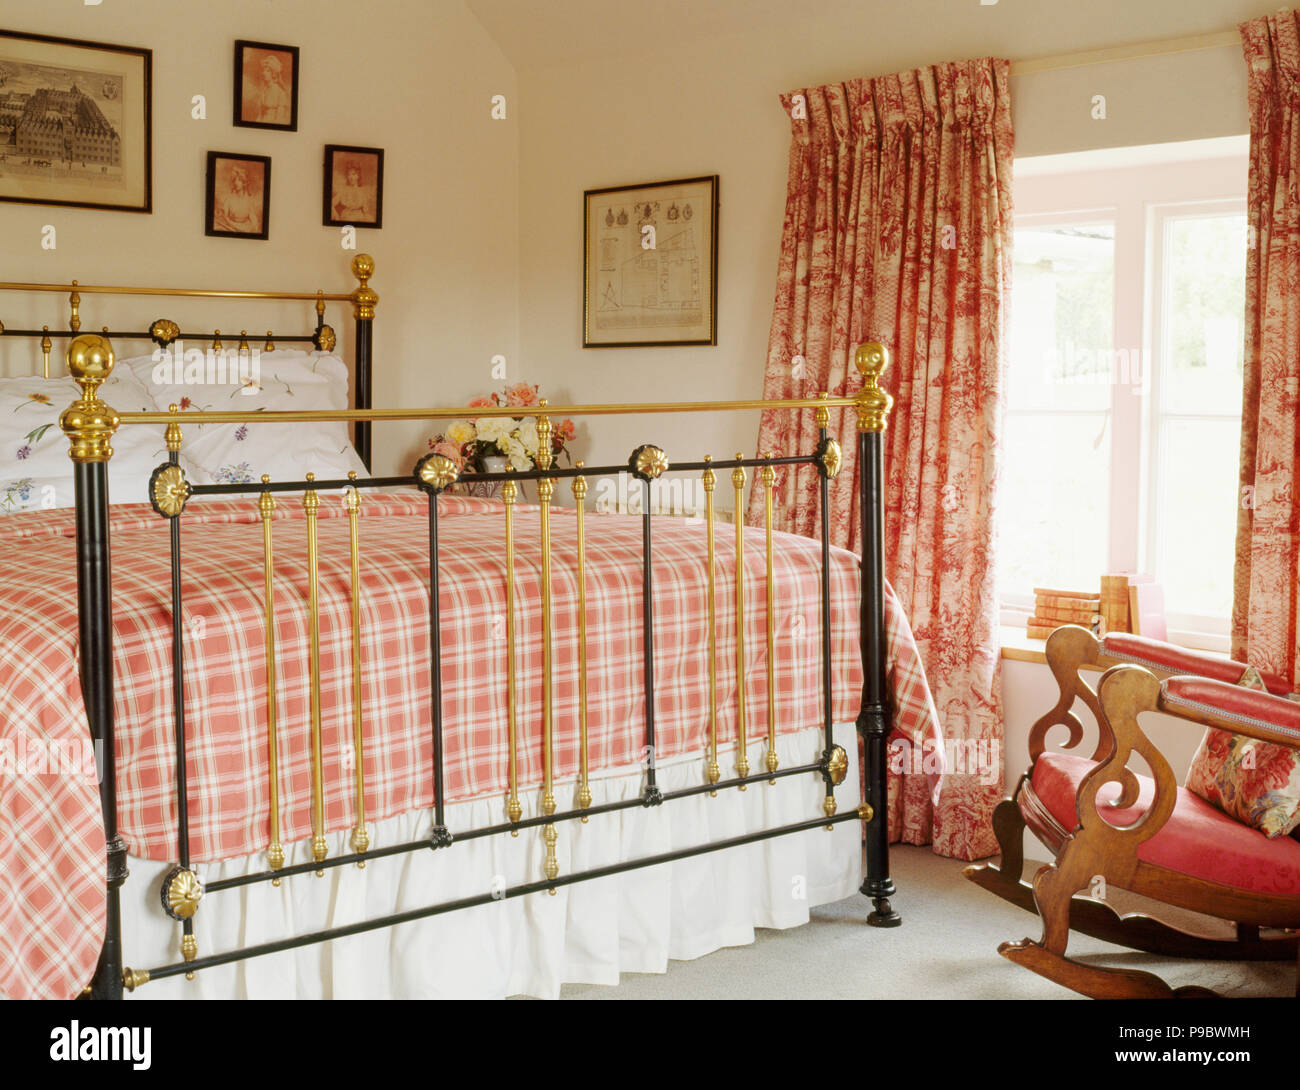 Red checked bedlinen on antique brass bed in country bedroom Stock Photo